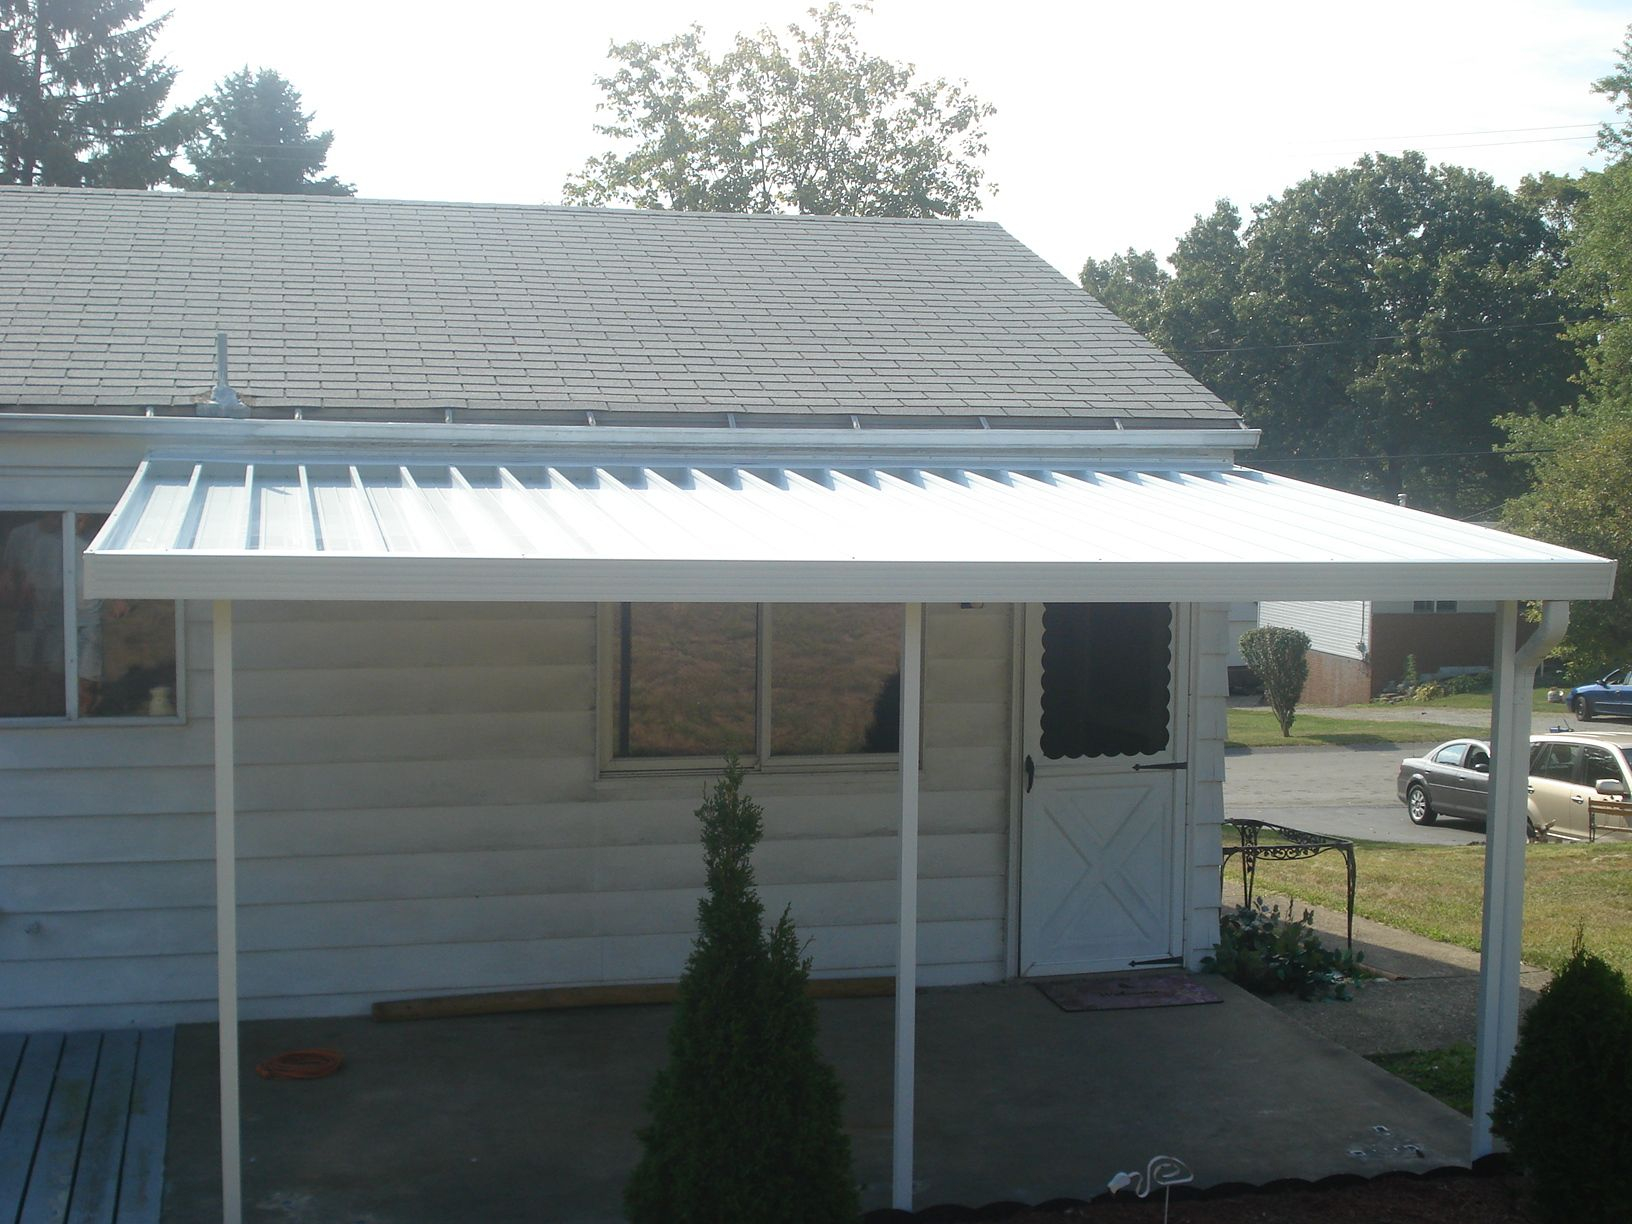 Crest 700 Flat Pan Aluminum Awning In White Aluminum pertaining to proportions 1632 X 1224